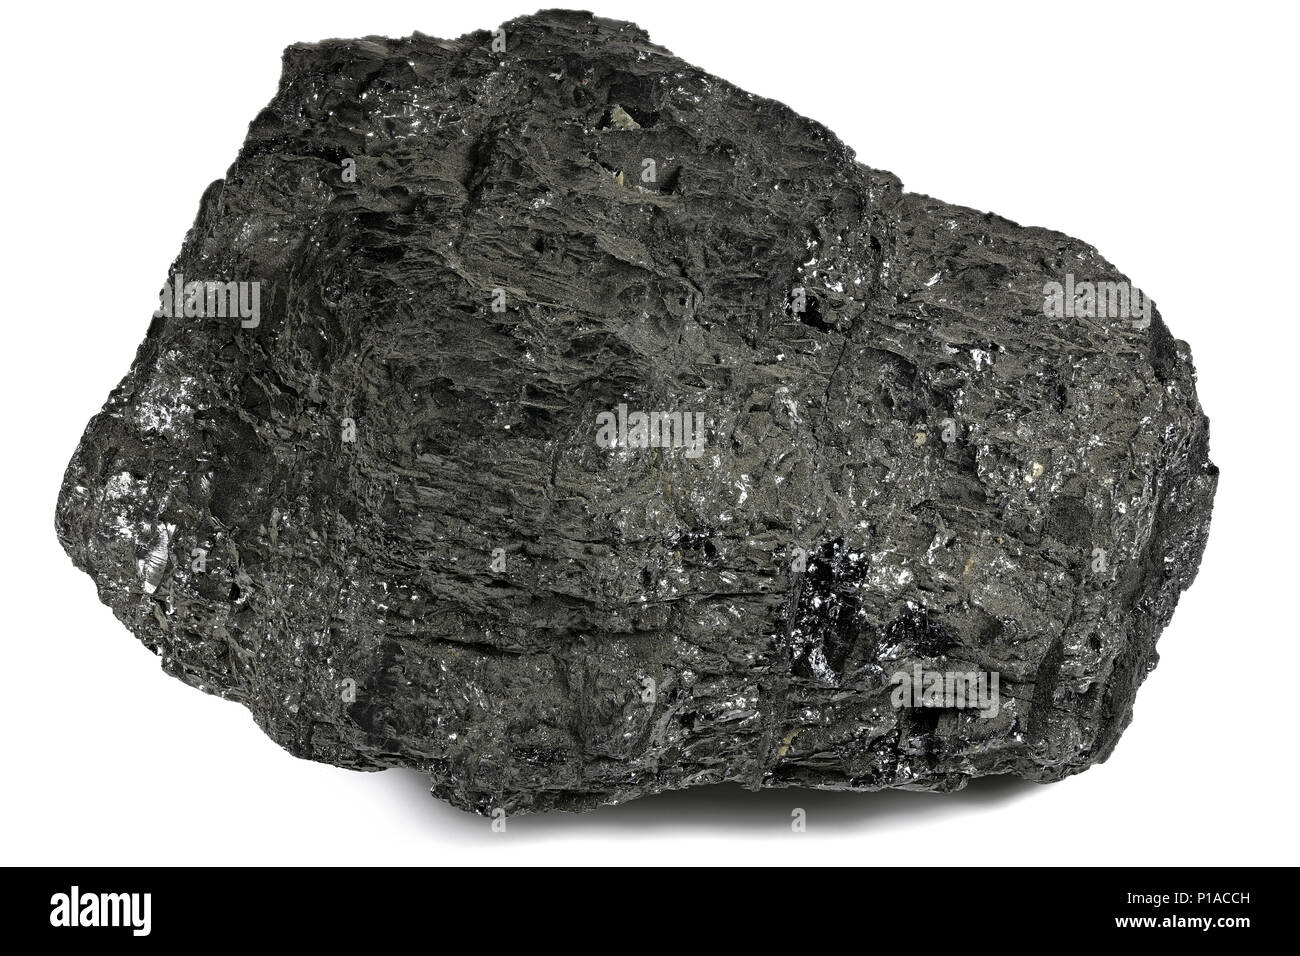 lignite (brown coal) from Bergheim/ Germany isolated on white